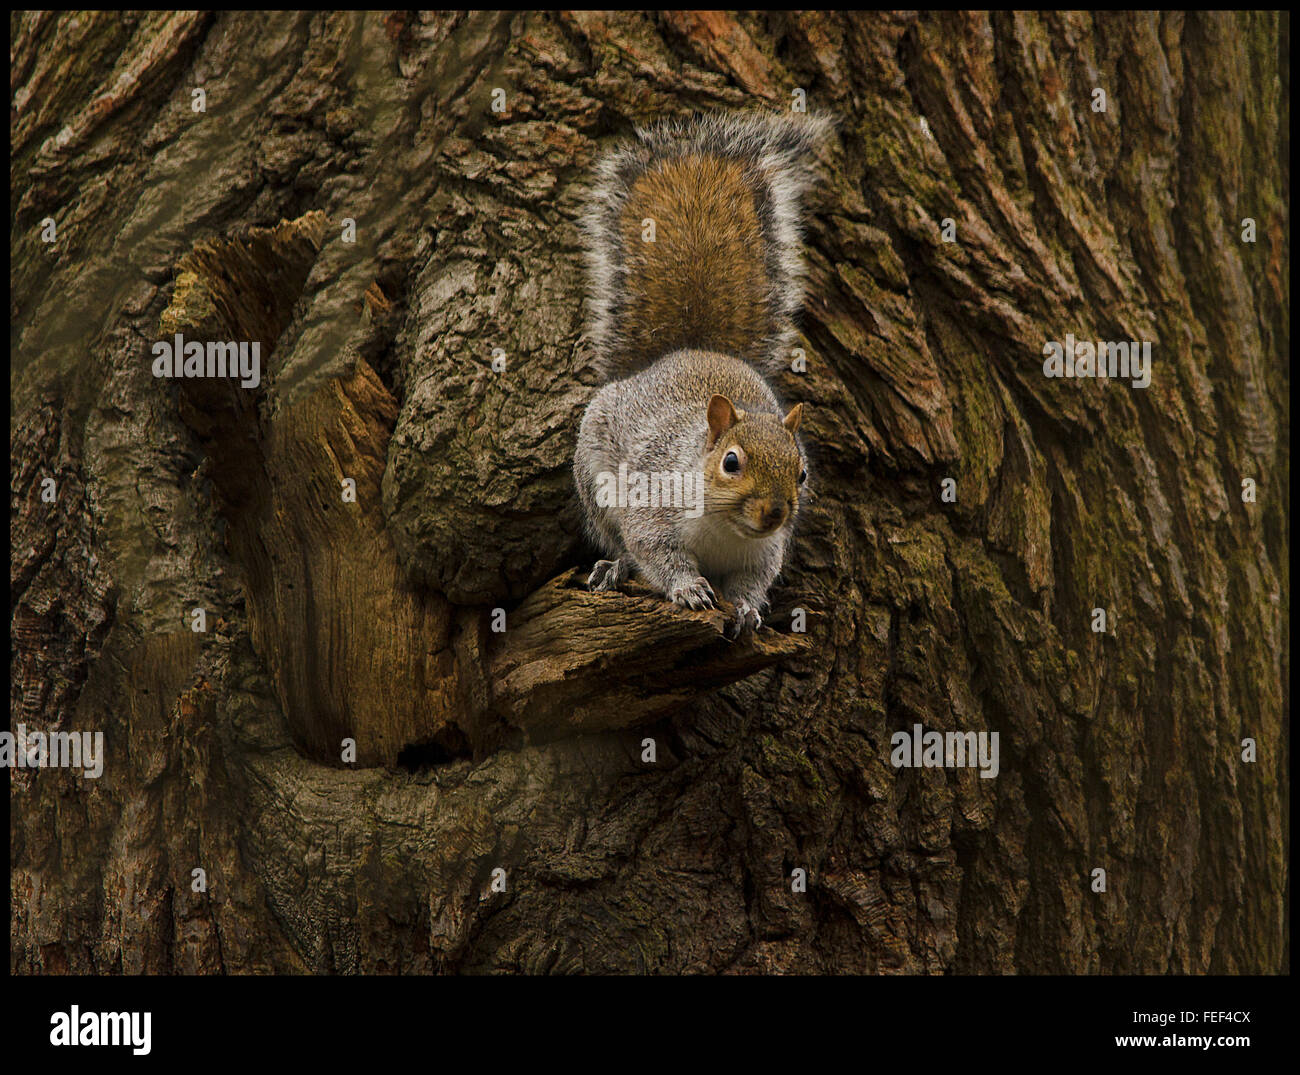 These are wild squirrels photographed totally in a natural surrounding Stock Photo